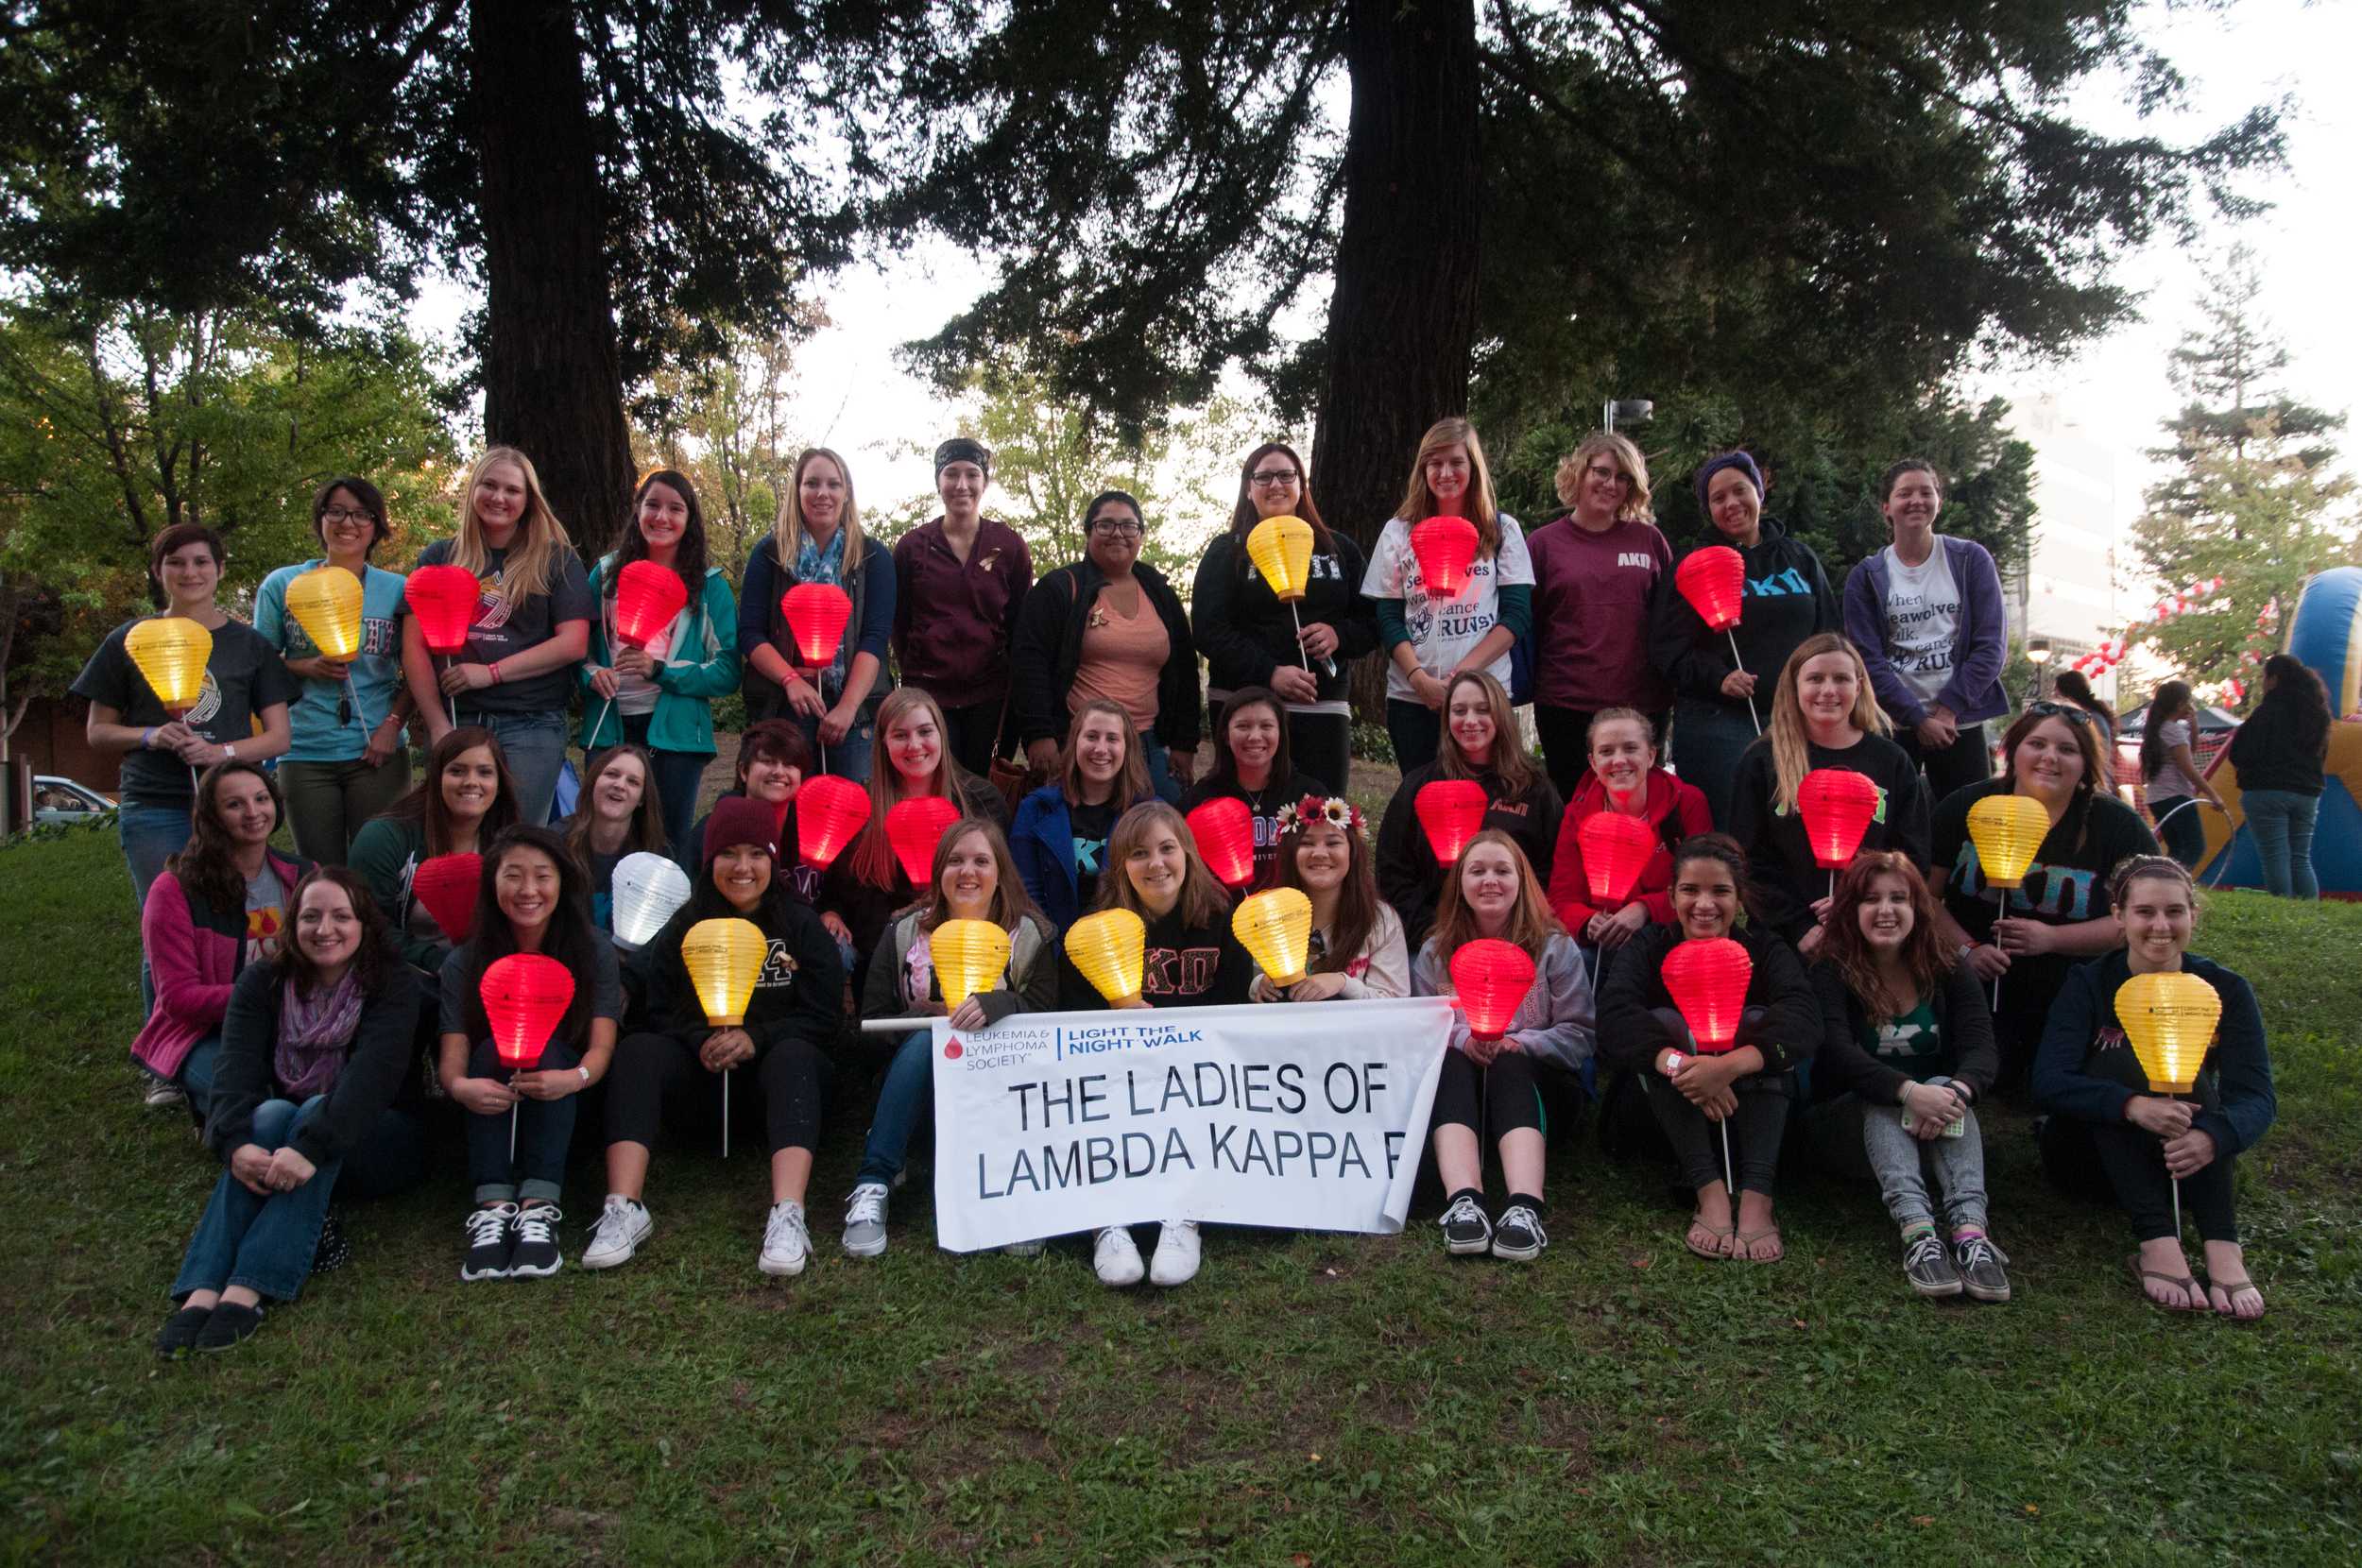 STAR // Gustavo VasquezSonoma State University students and members of the Lambda Kappa Pi sorority participated in the Leukemia &amp; Lymphoma Society’s Light the Night Walk on Saturday in effort to raise money for cancer research and awareness.